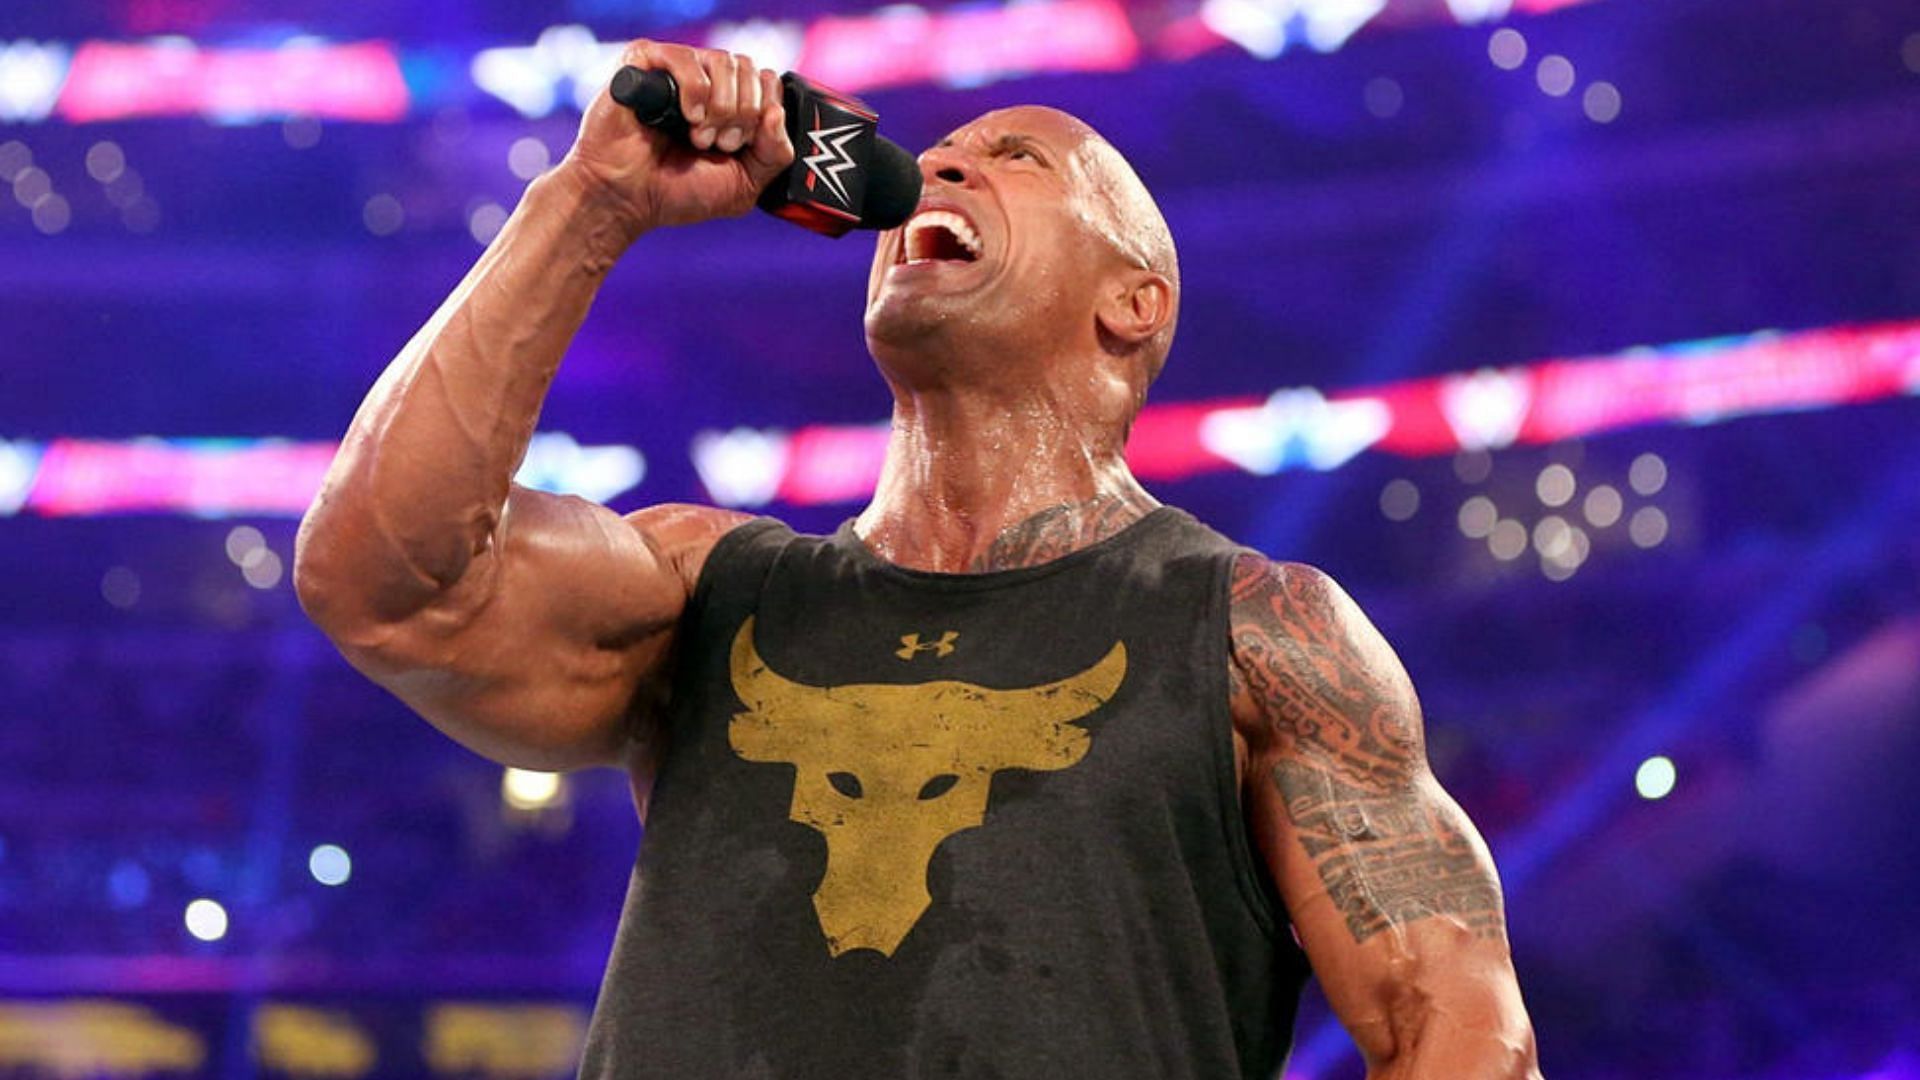 The Rock is a proud member of Anoa